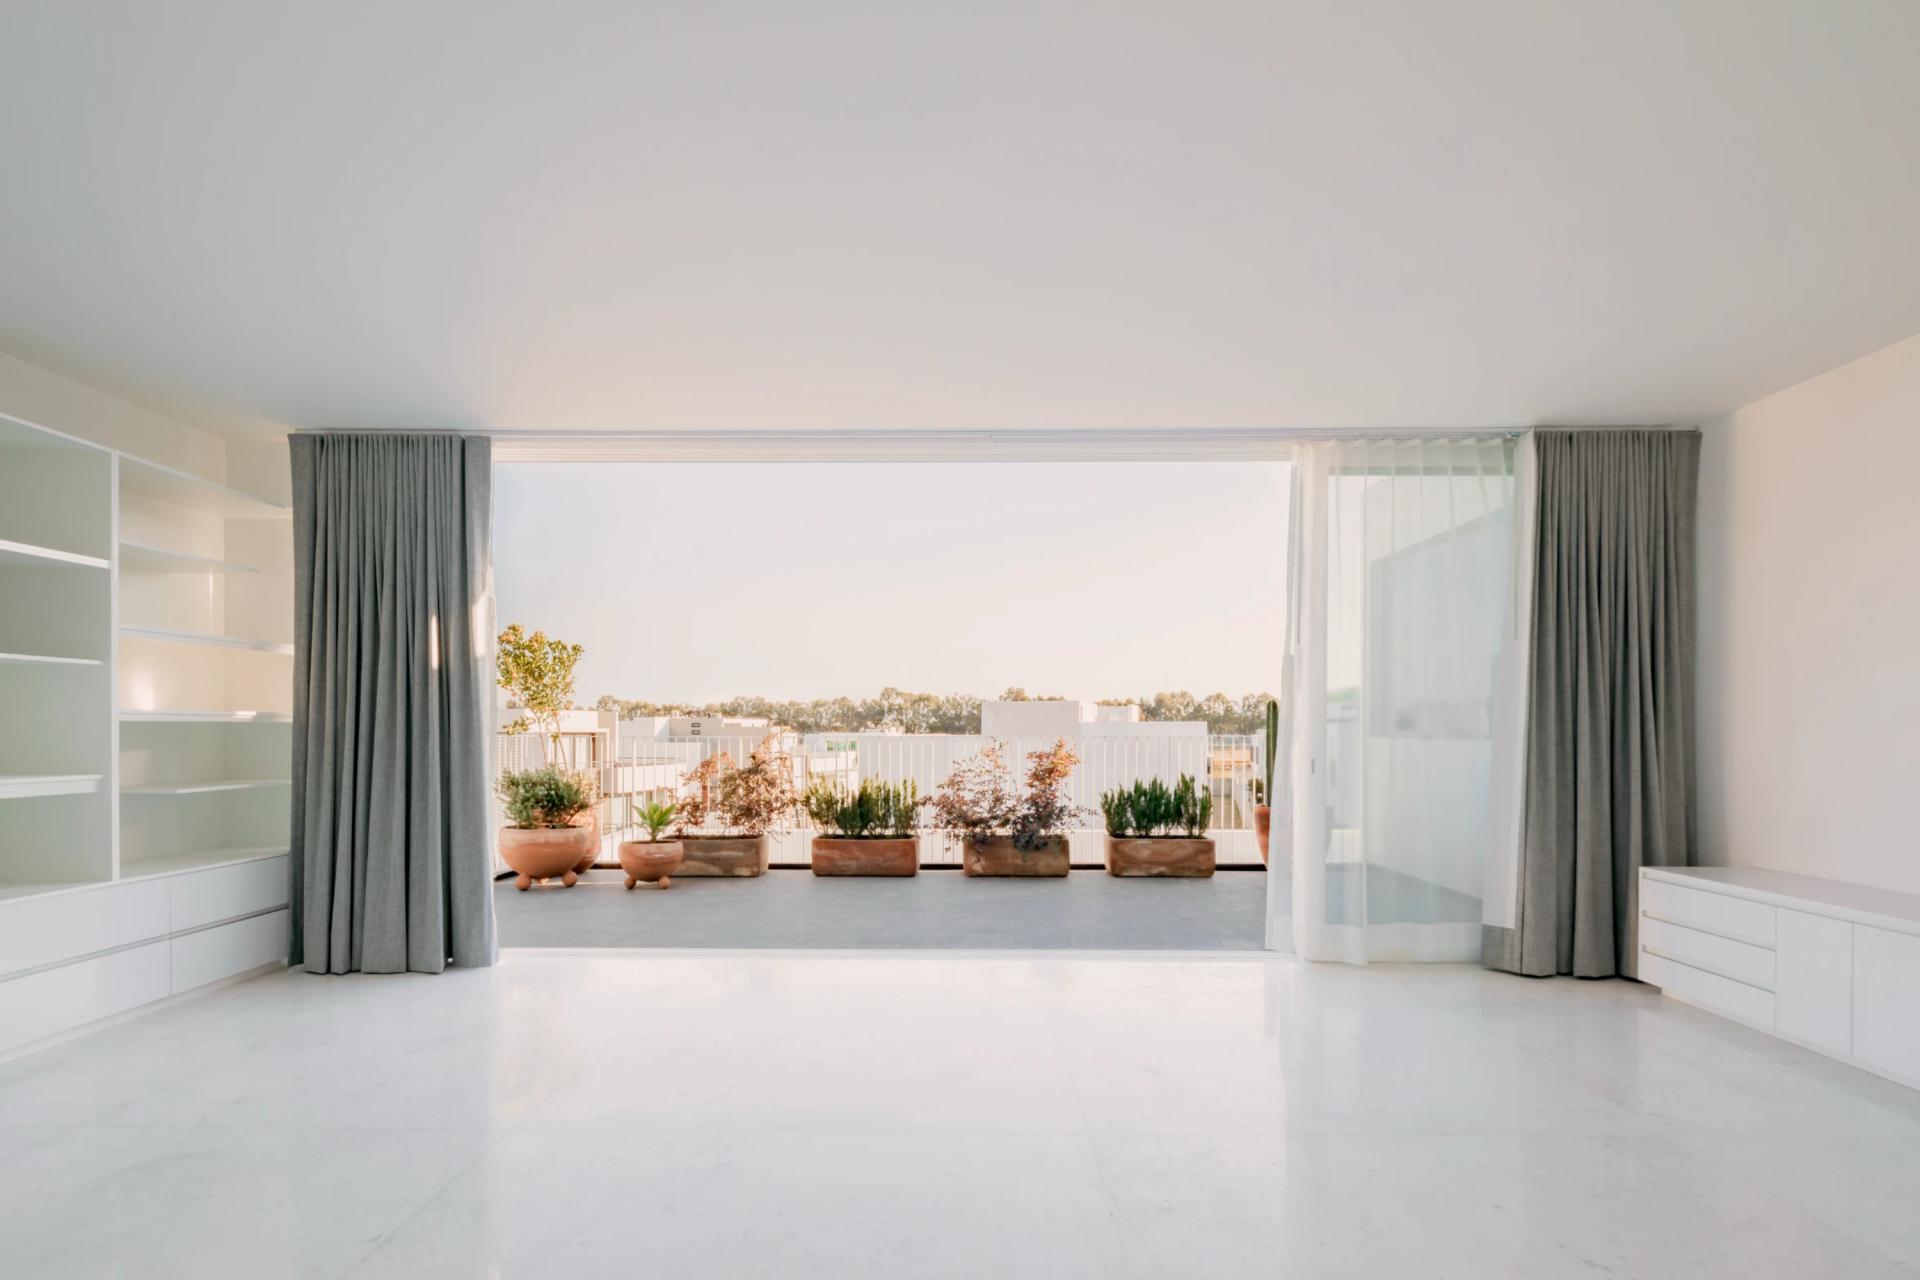 This 3,347 sq. ft. all-white home in Mexico is a minimalist sanctuary